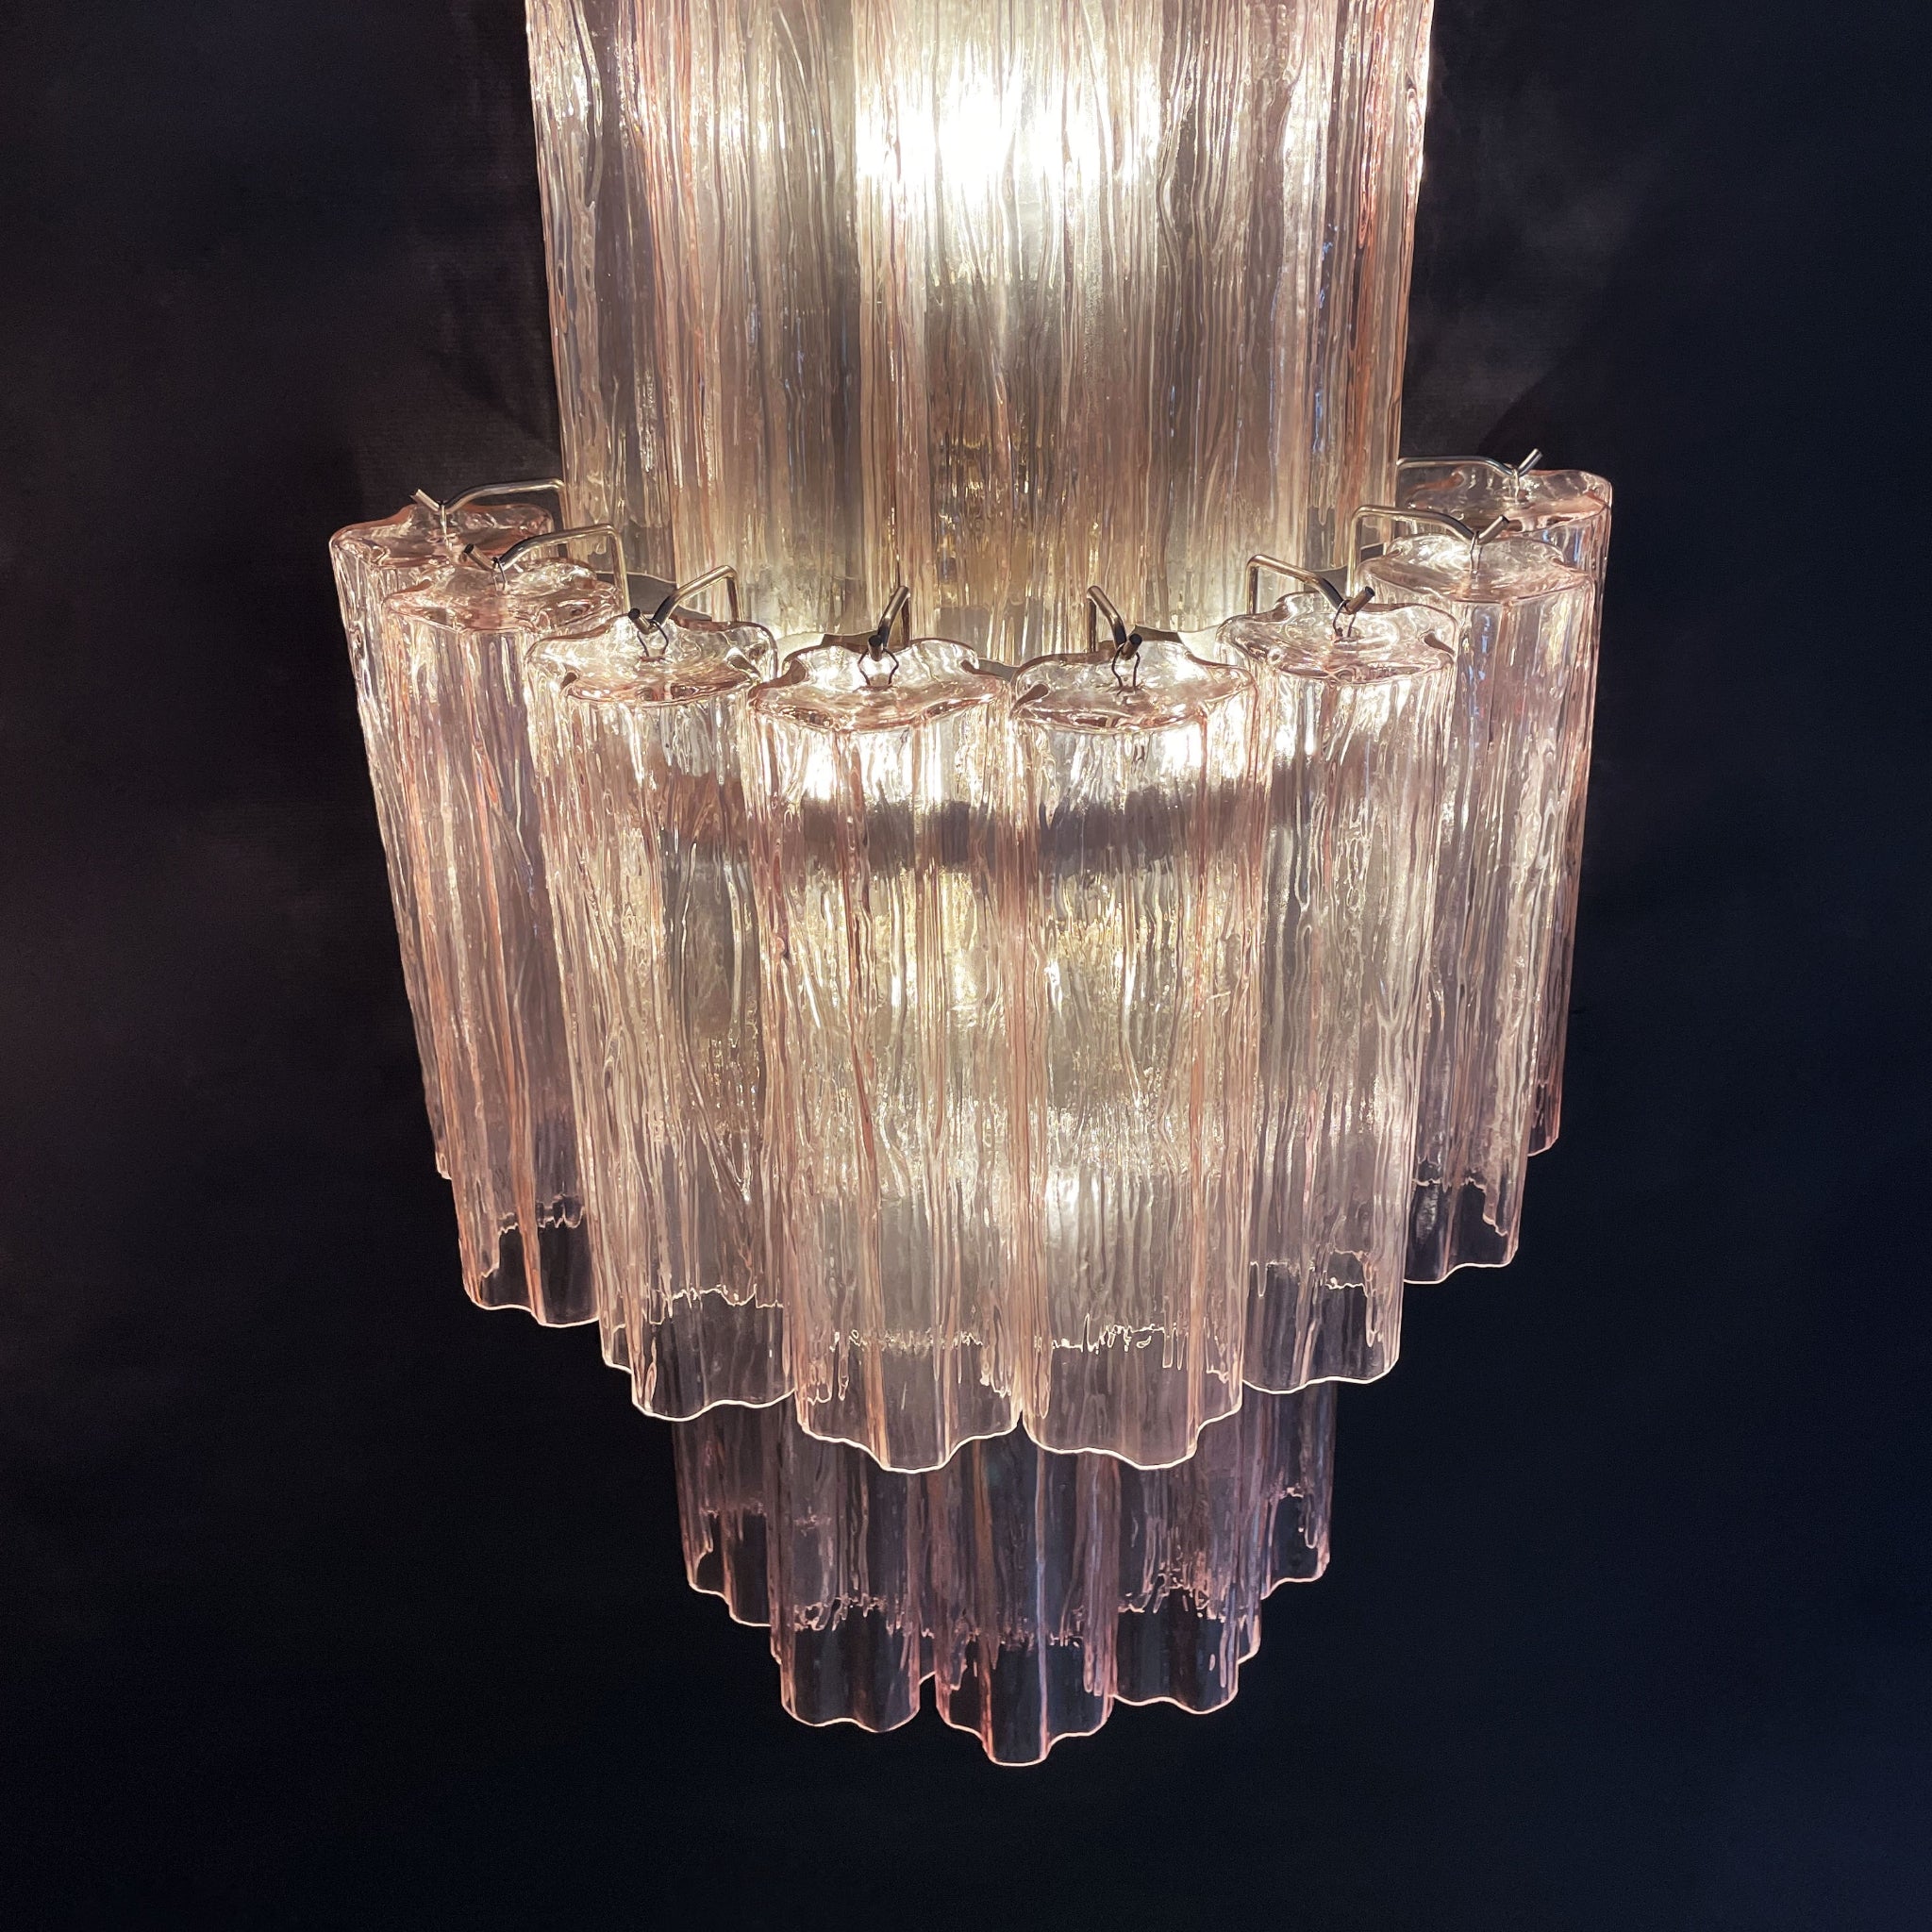 Pair of Murano Glass Tube Wall Sconces with 18 pink glass tube